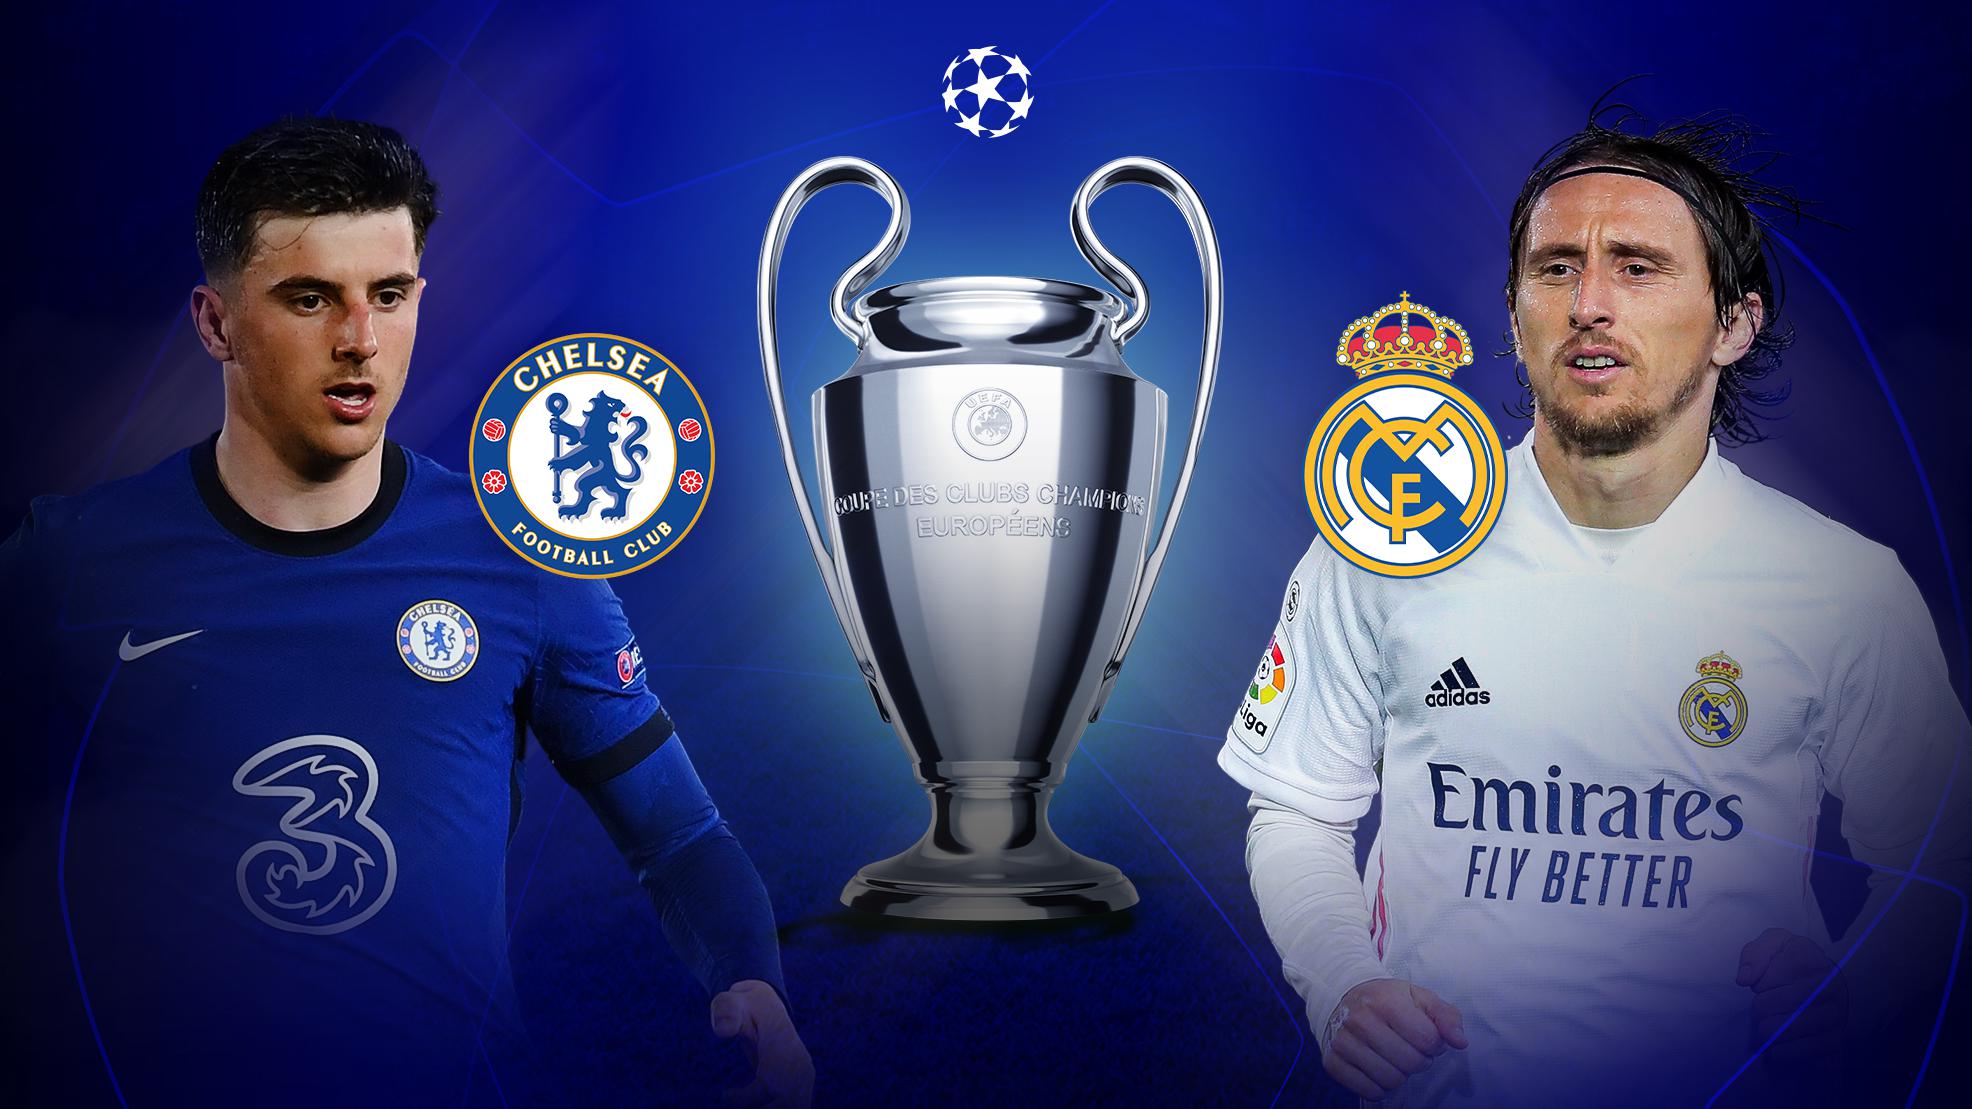 Chelsea vs Real Madrid Champions League preview: where to watch, starting line-ups, team news - UEFA Champions League - UEFA.com